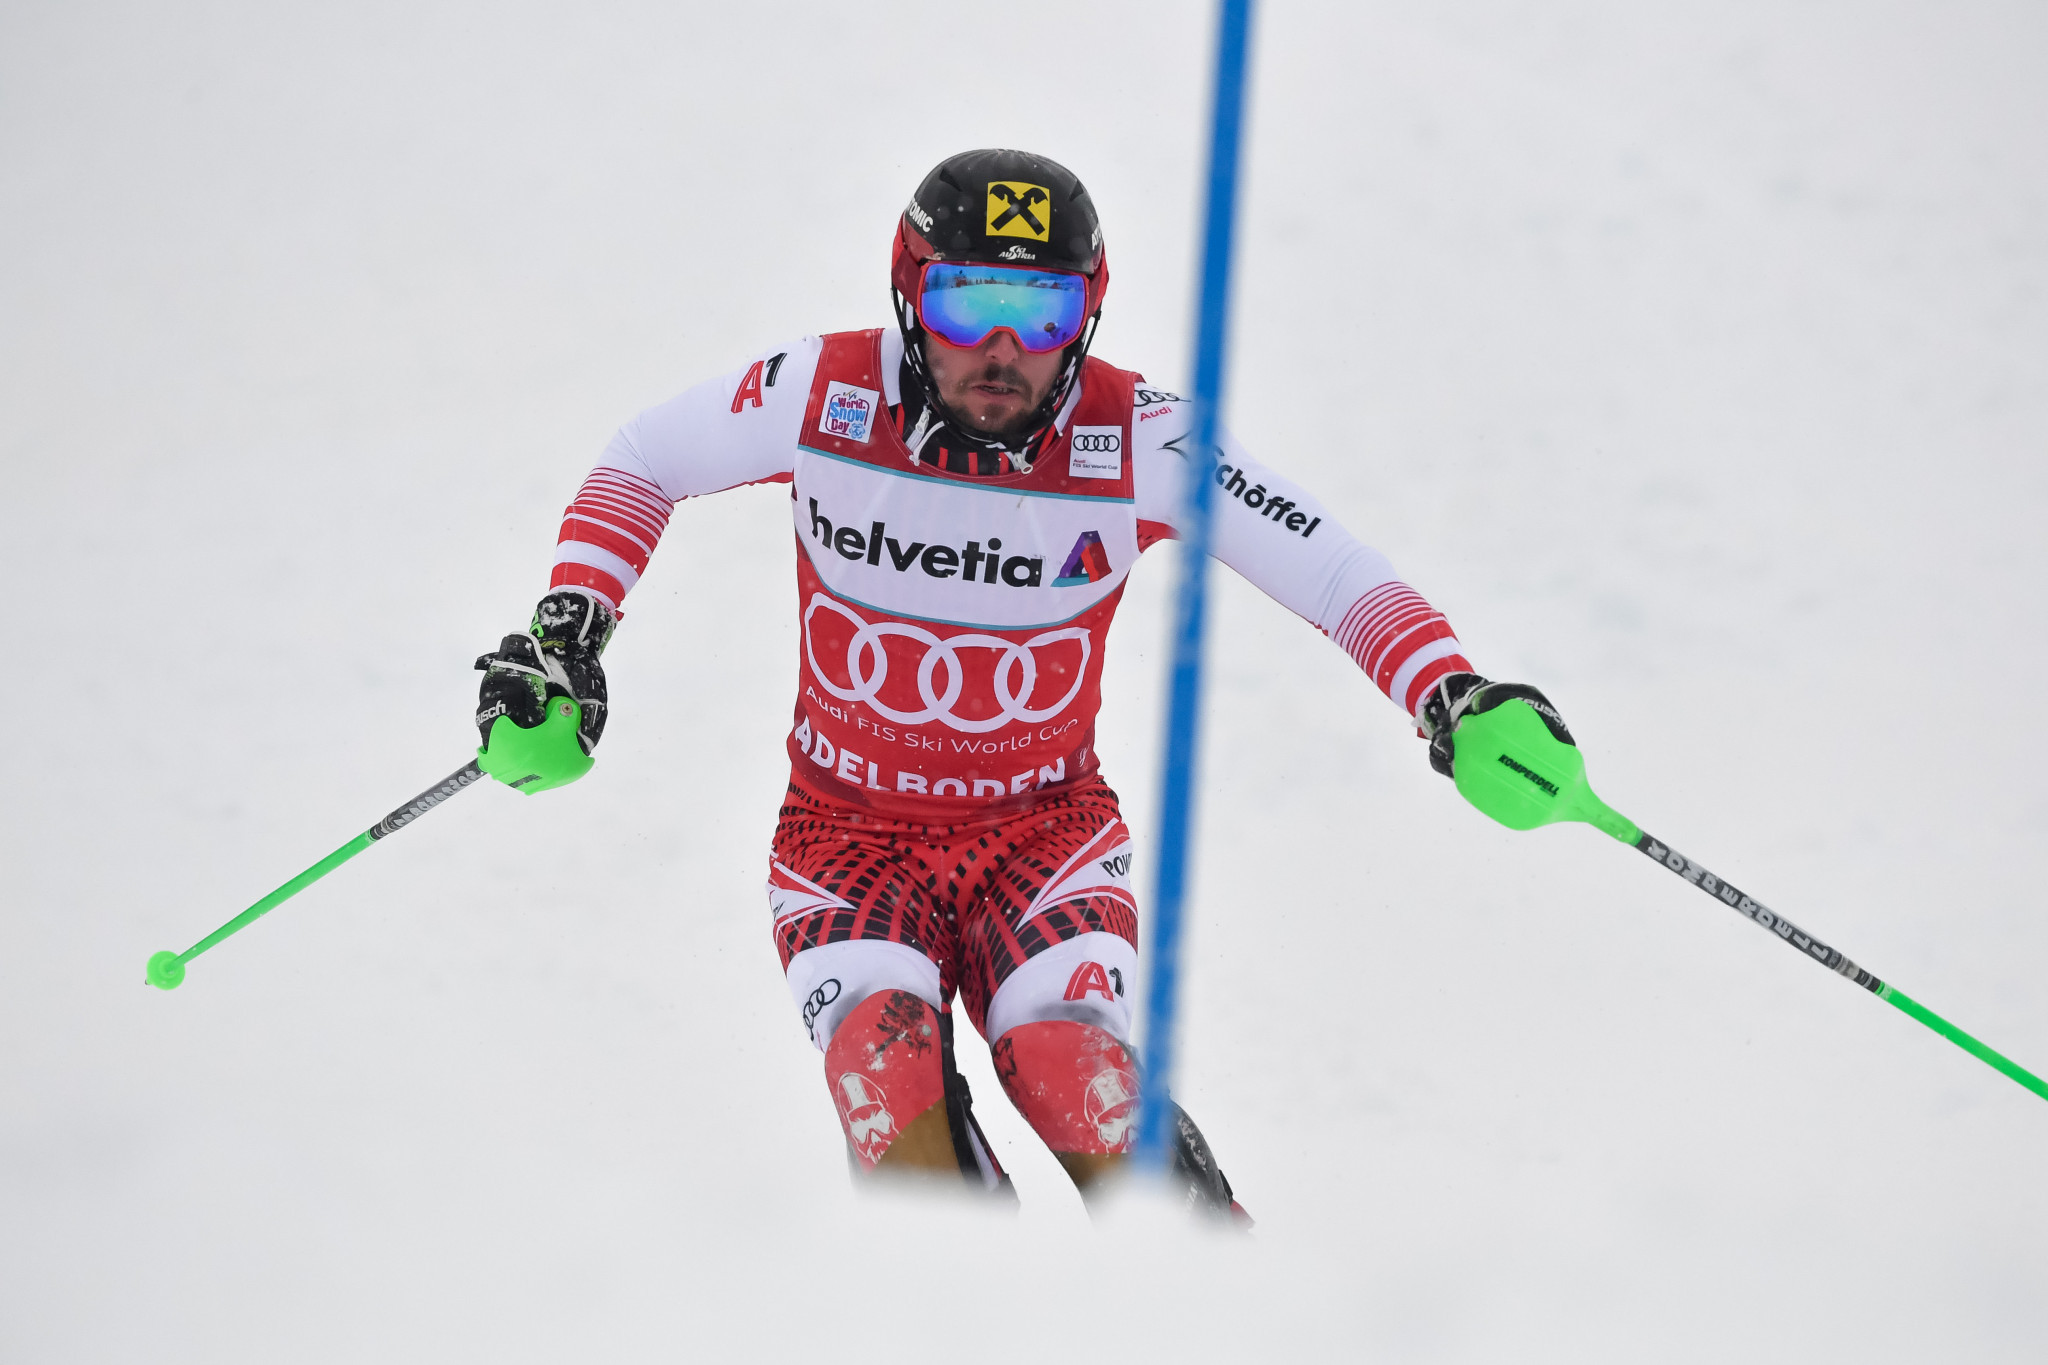 Marcel Hirscher won for the second consecutive day in Adelboden ©Getty Images